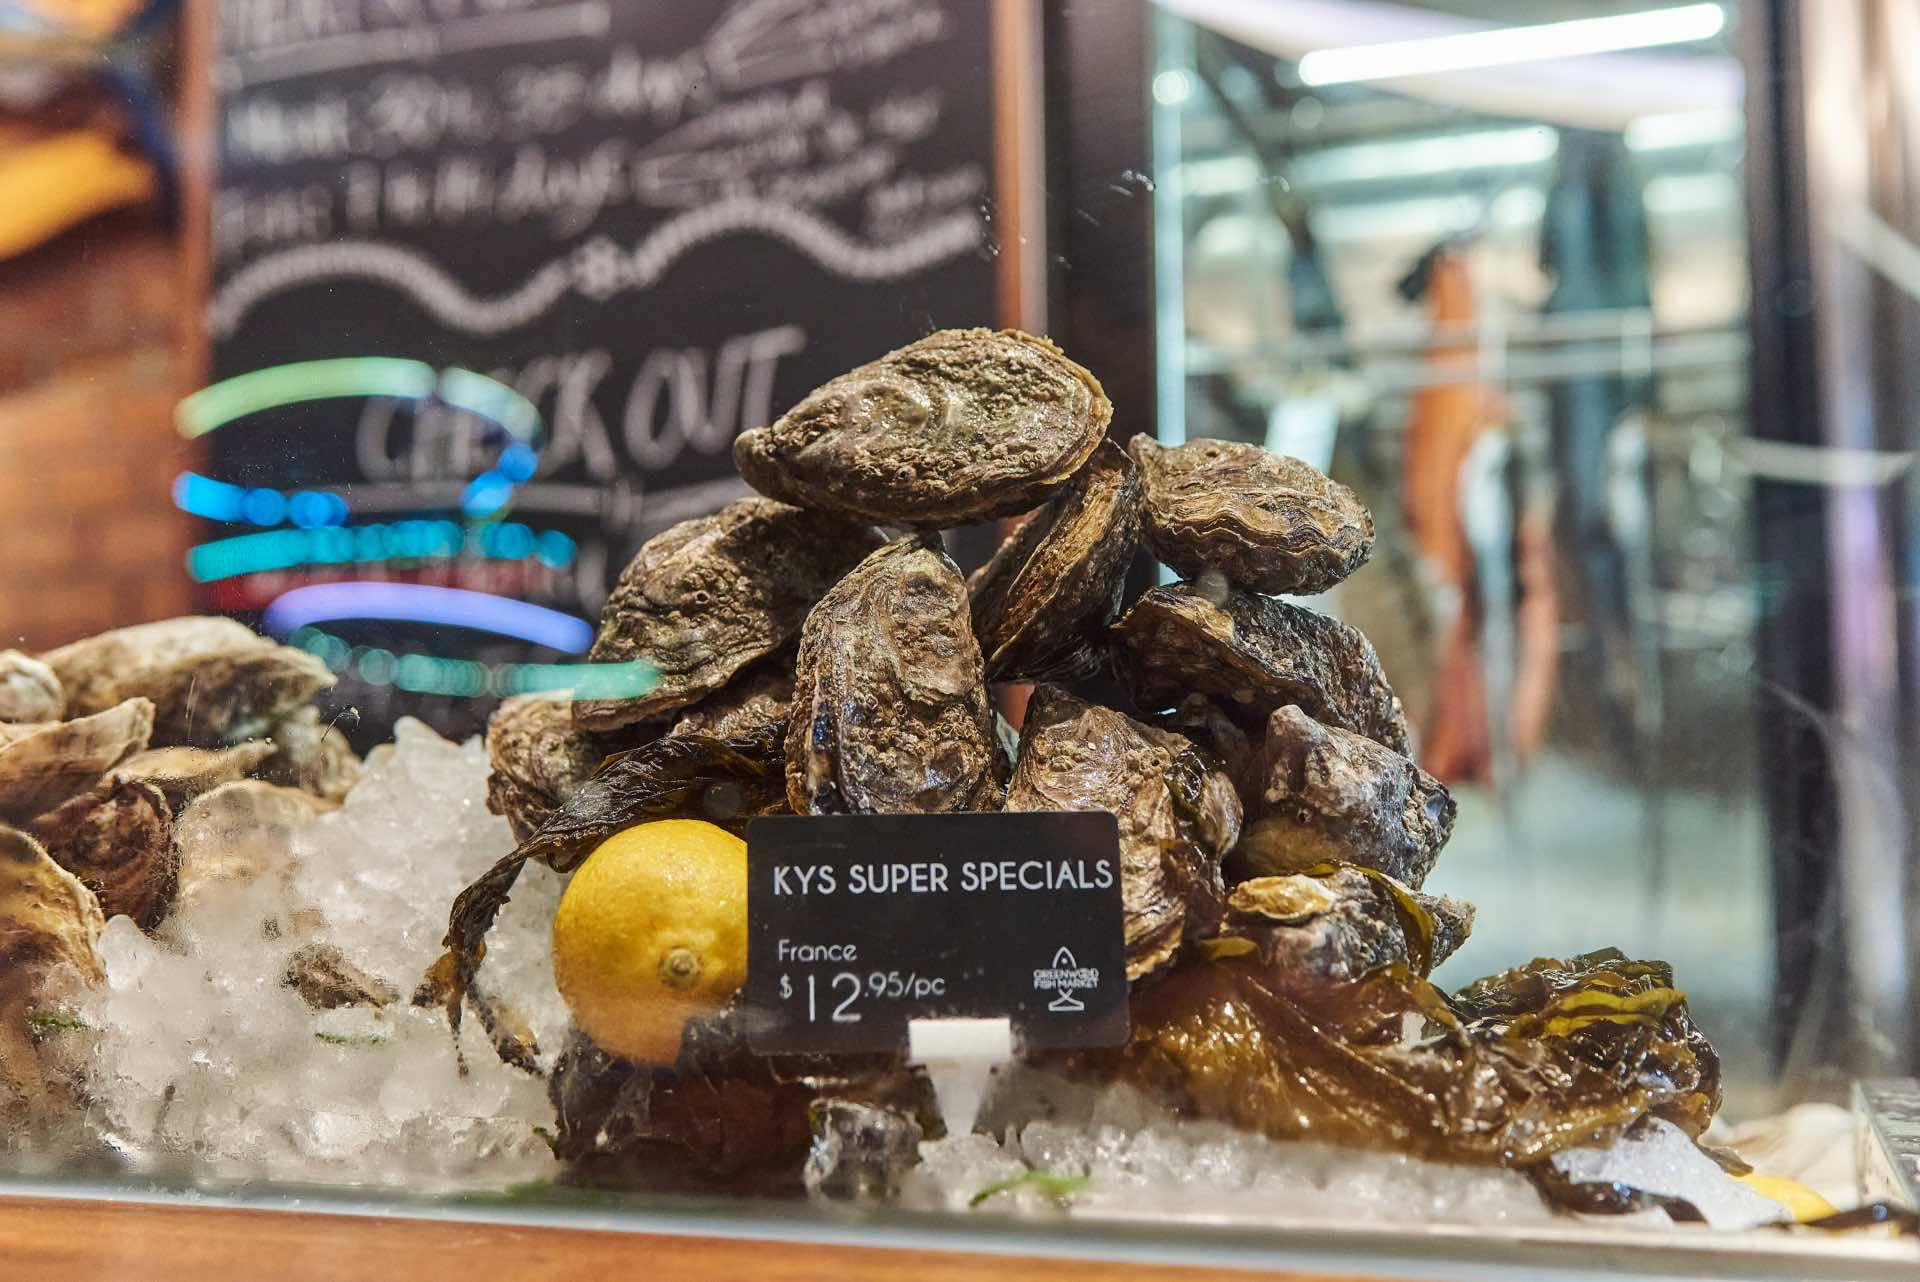 , Greenwood Fish Market’s World Oyster Festival returns this July with 22 varieties from 8 countries